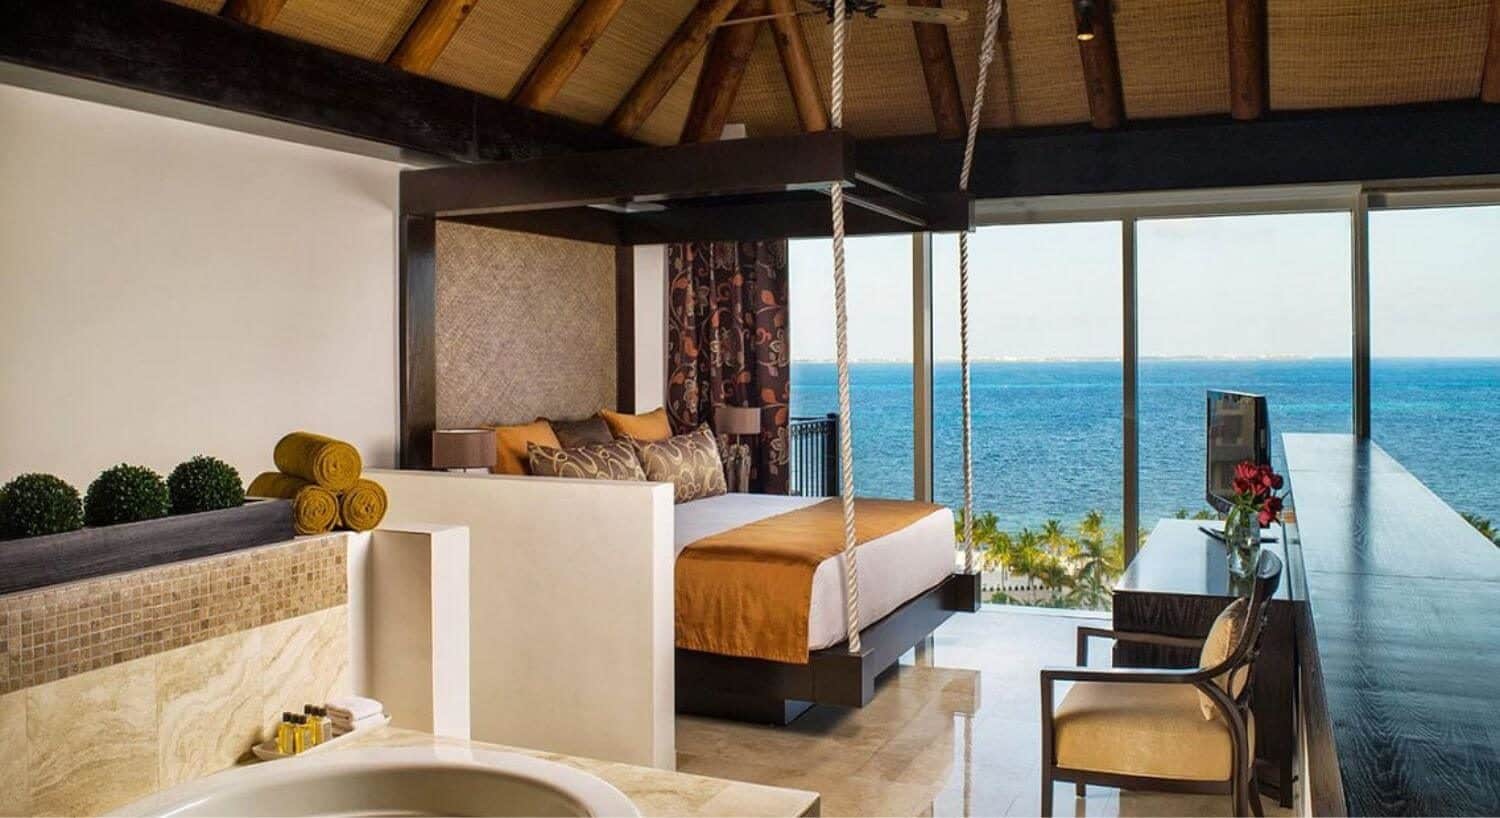 A bedroom with a seemingly hanging king bed with white, orange and brown bedding, a dresser with flat screen TV on top, a plush armchair, jetted tub, and floor to ceiling windows with beautiful ocean views.